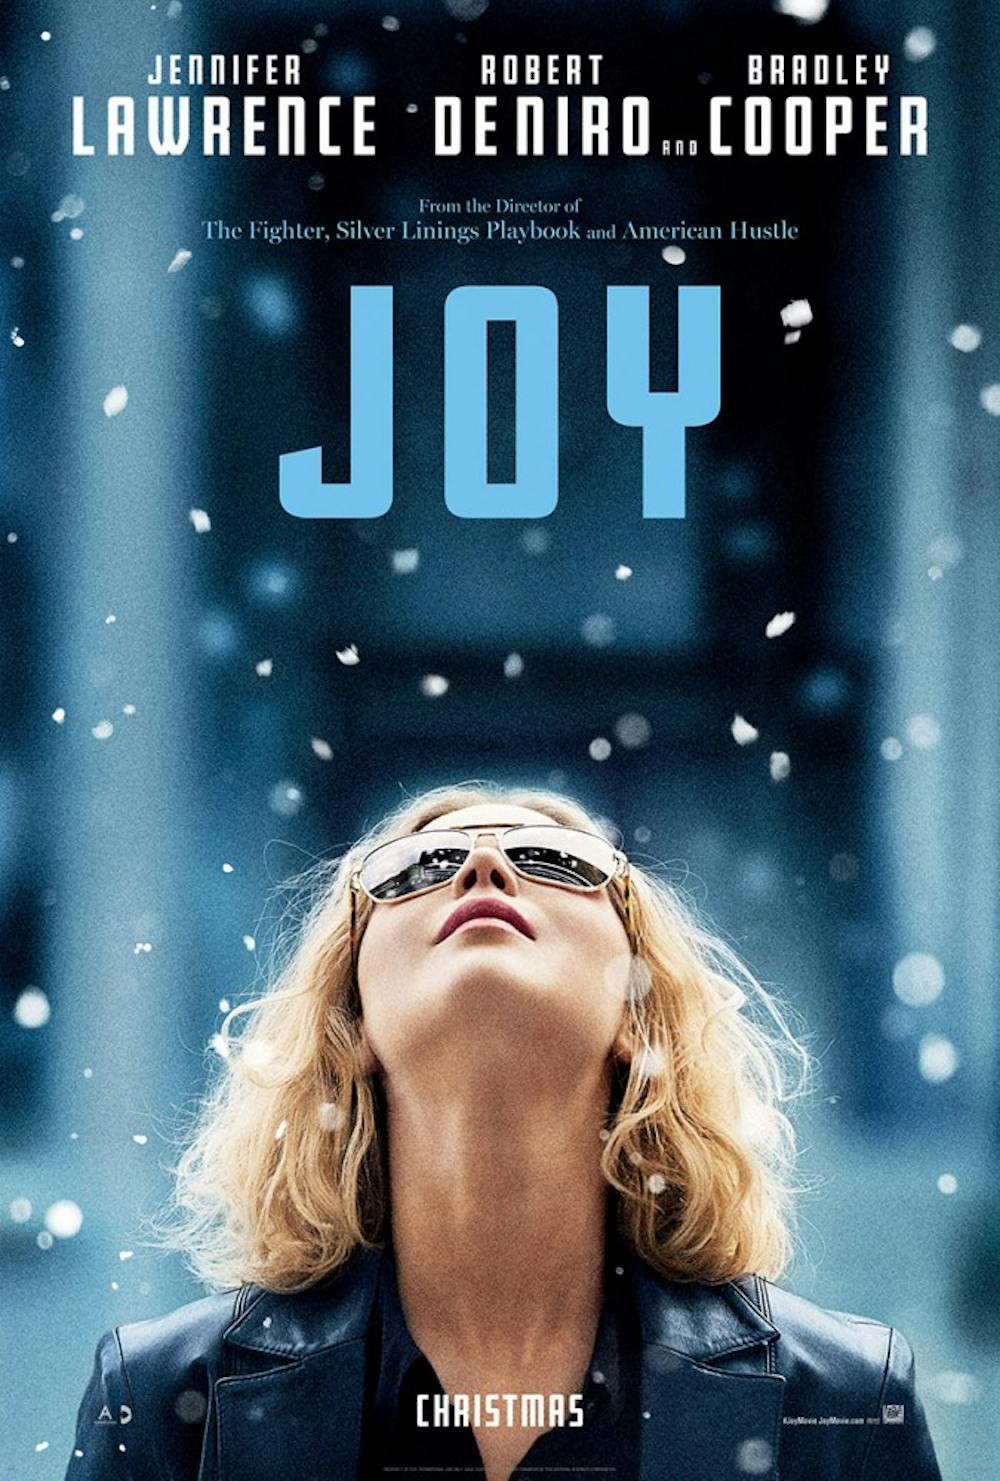 <p>With an all-star cast, "Joy" should be one of this holiday season's best offerings.</p>